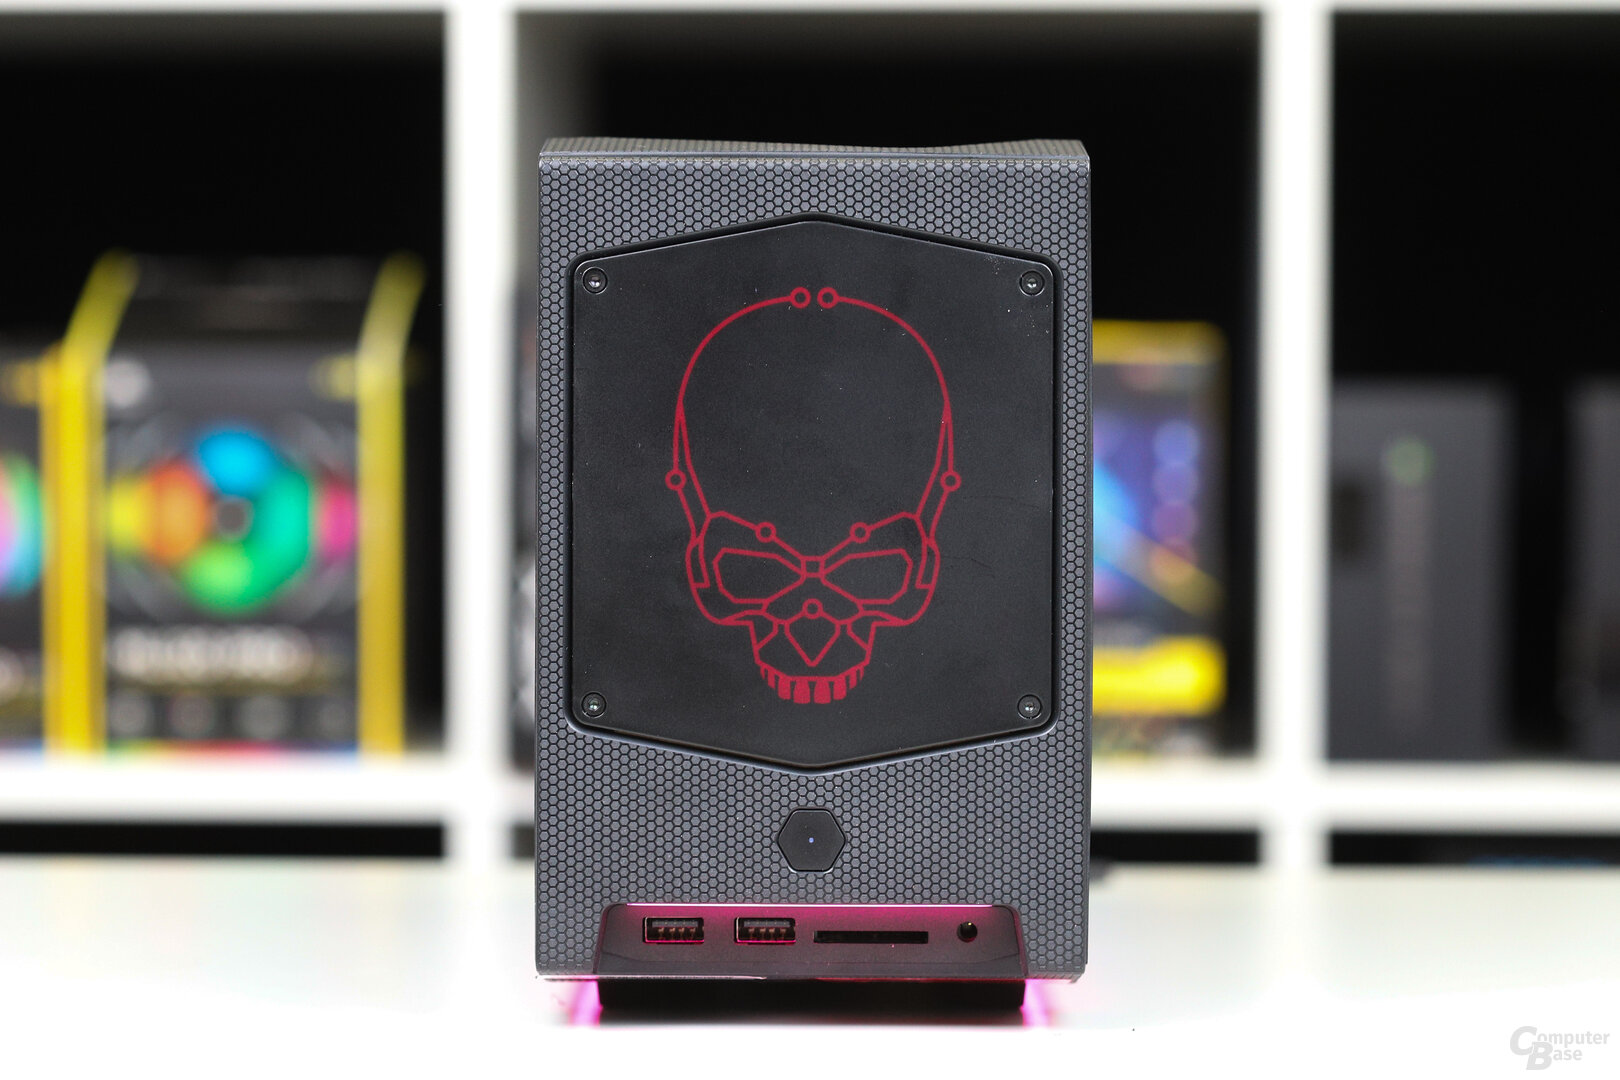 Intel NUC 11 Extreme – Front